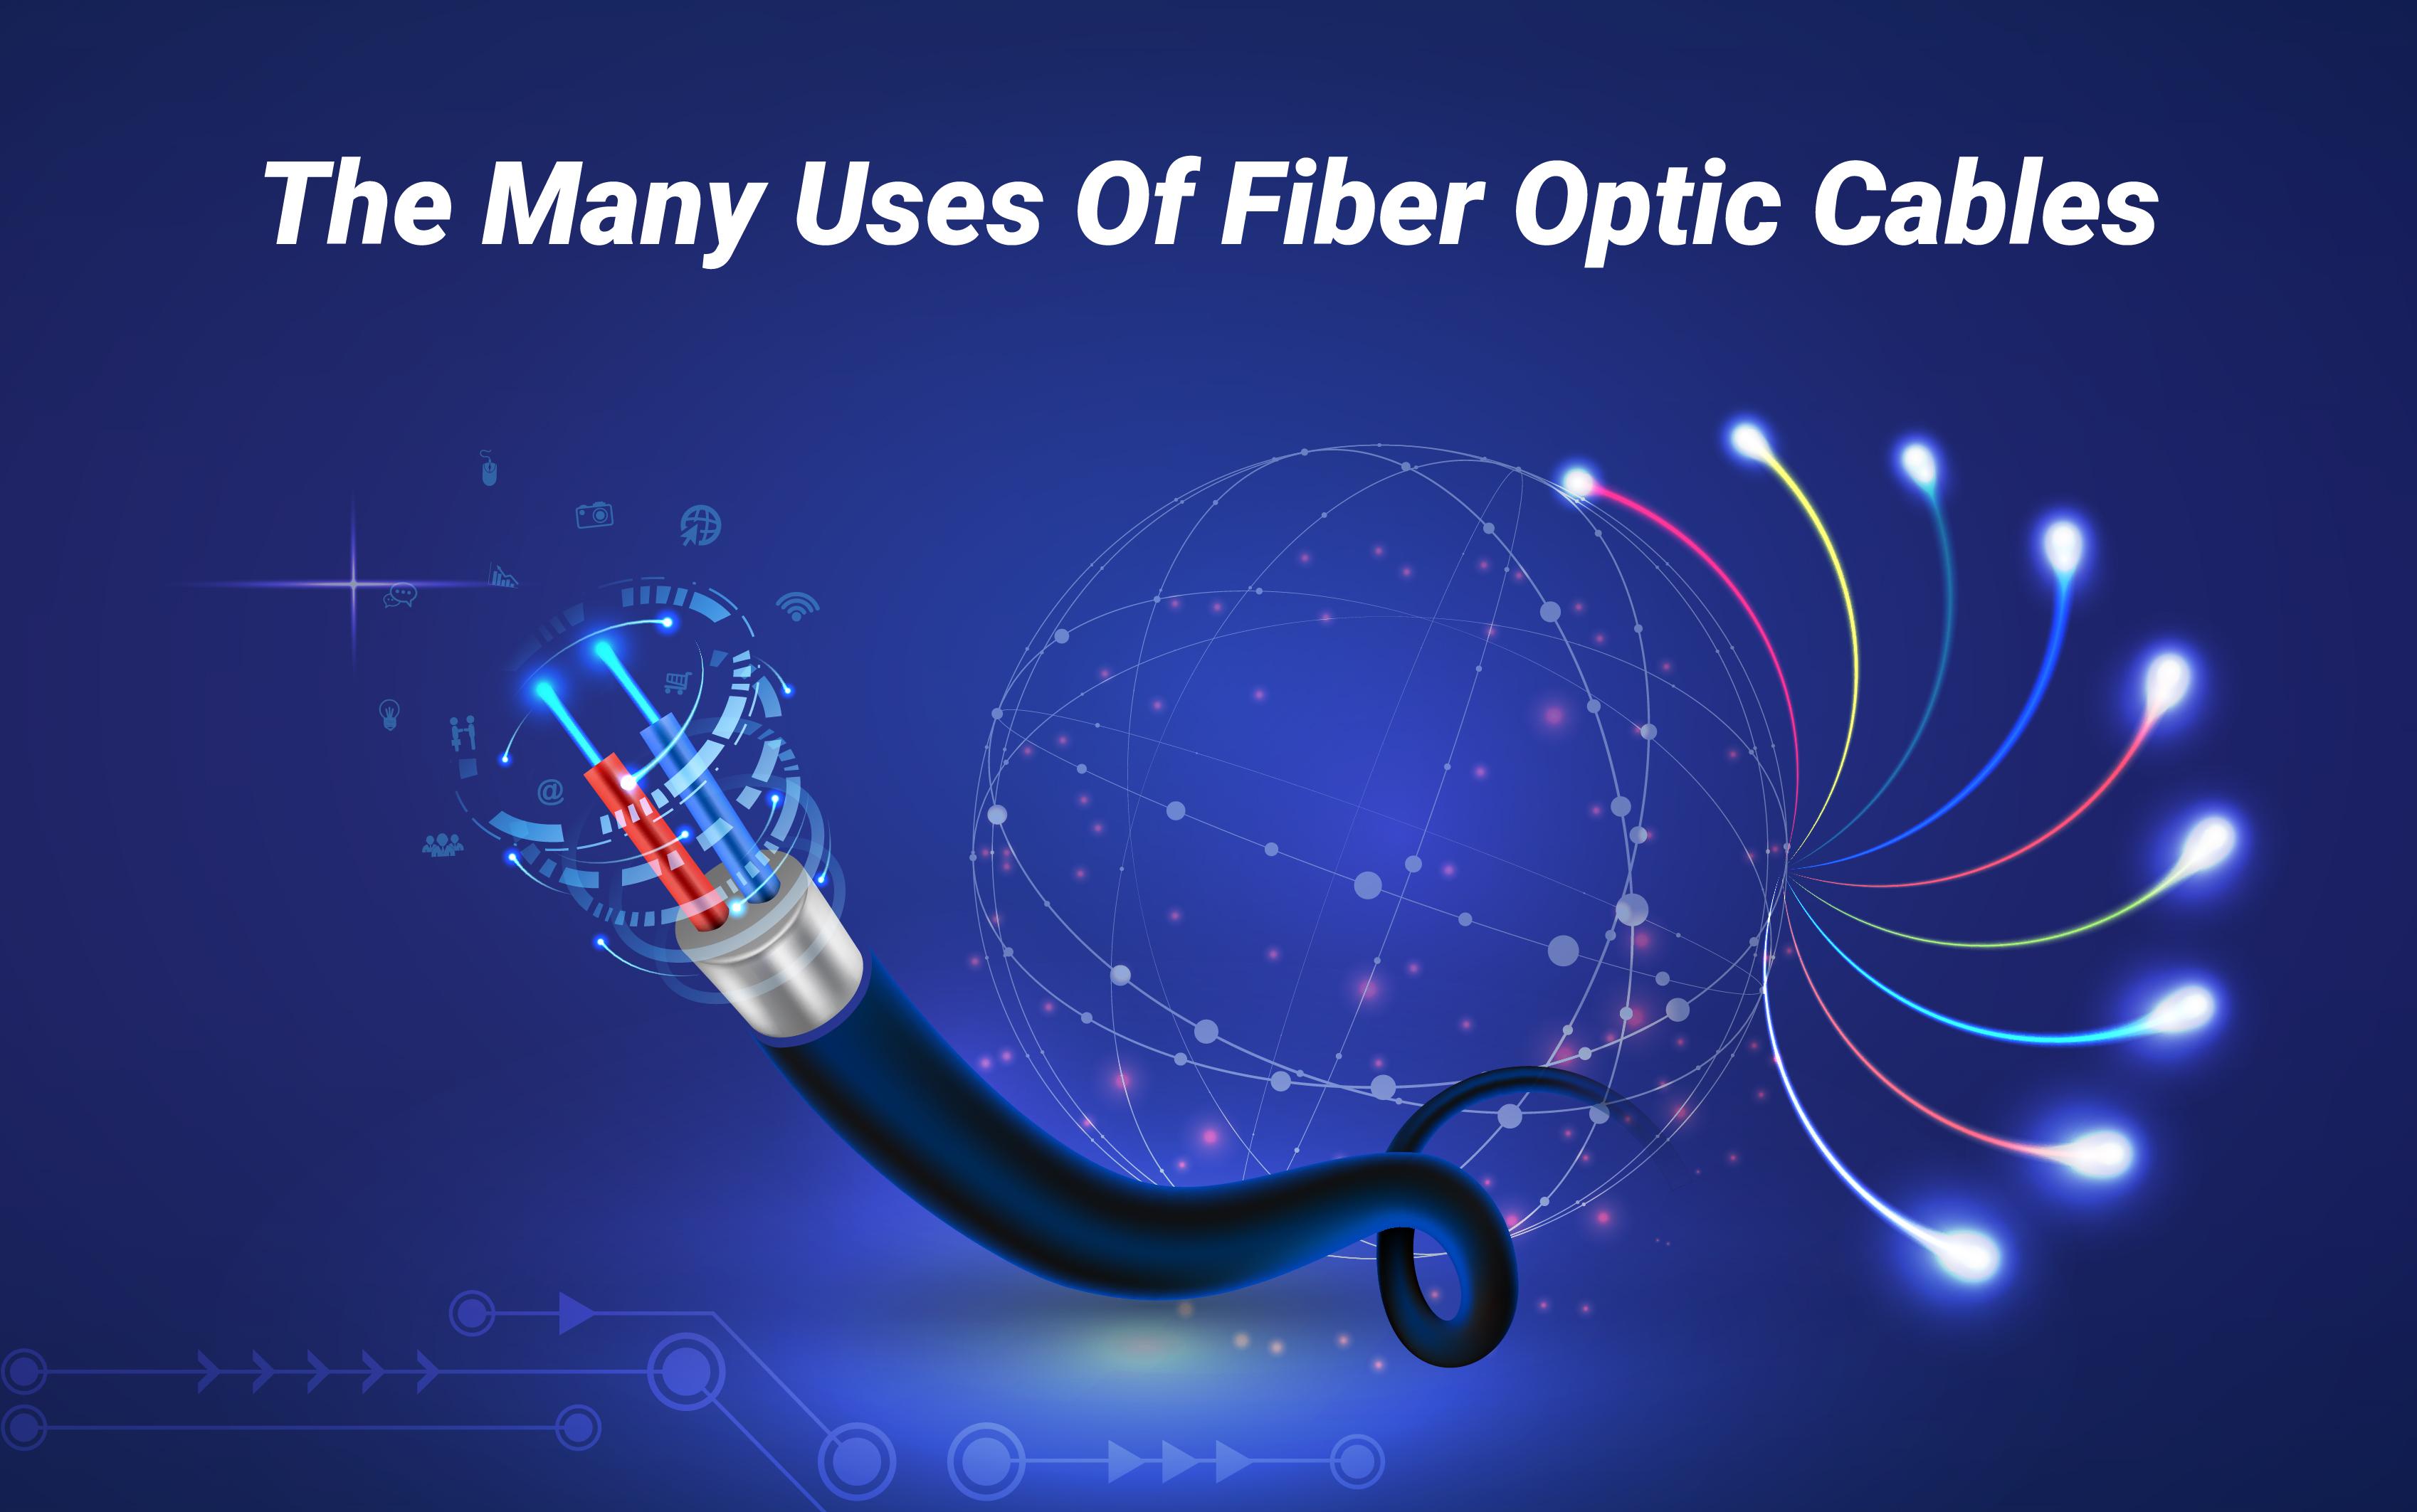 The Many Uses Of Fiber Optic Cables